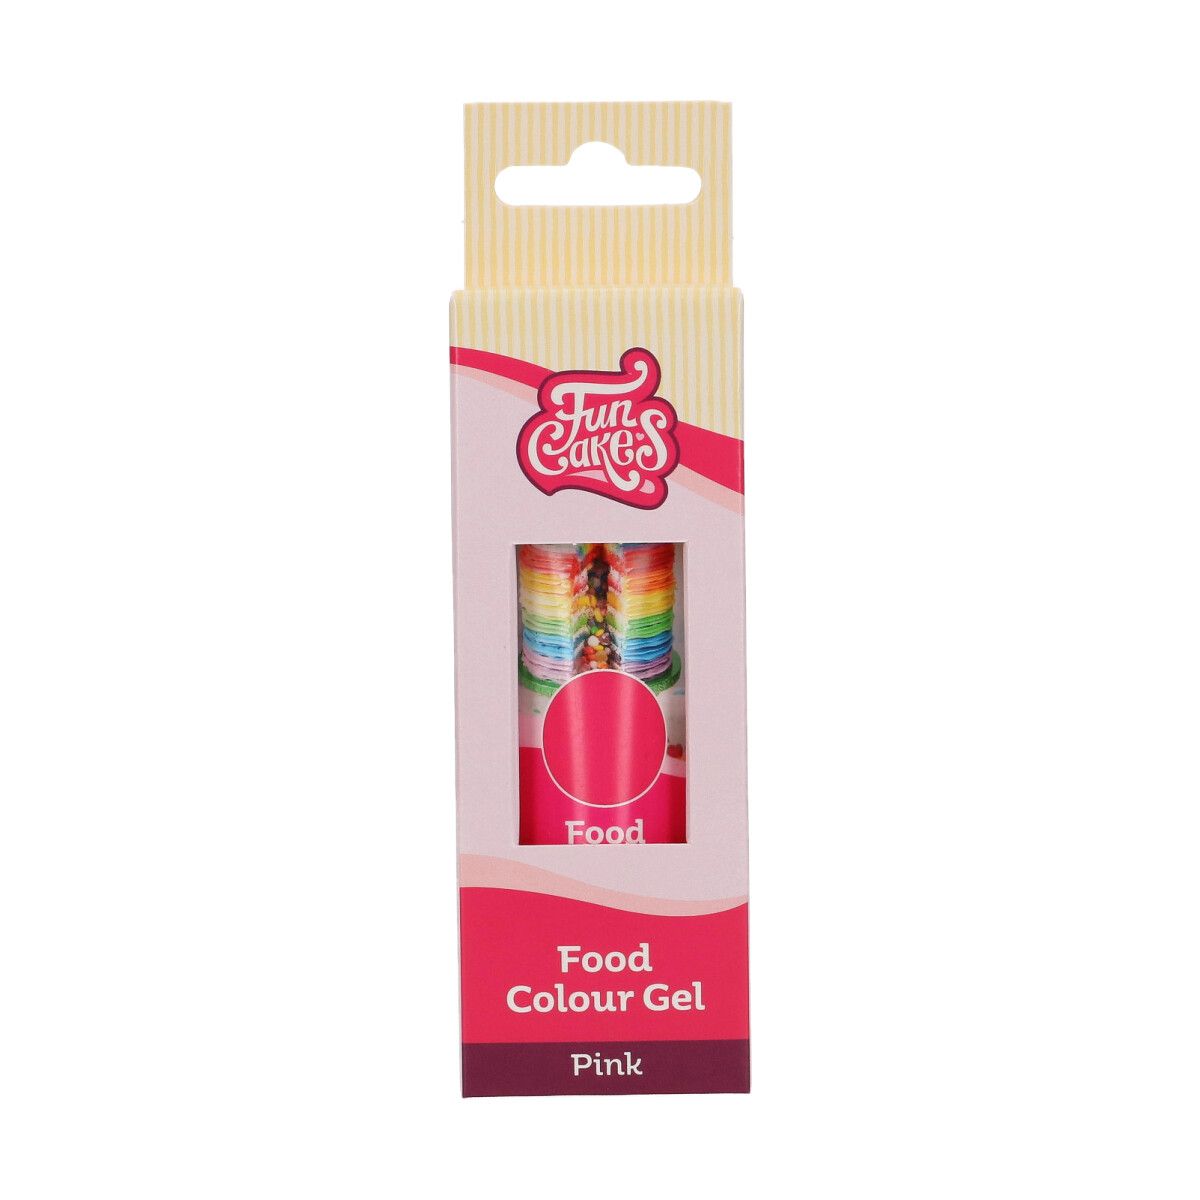 FUNCAKES GEL COLORANT ALIMENTAIRE FUNCOLOURS - ROSE 30 g